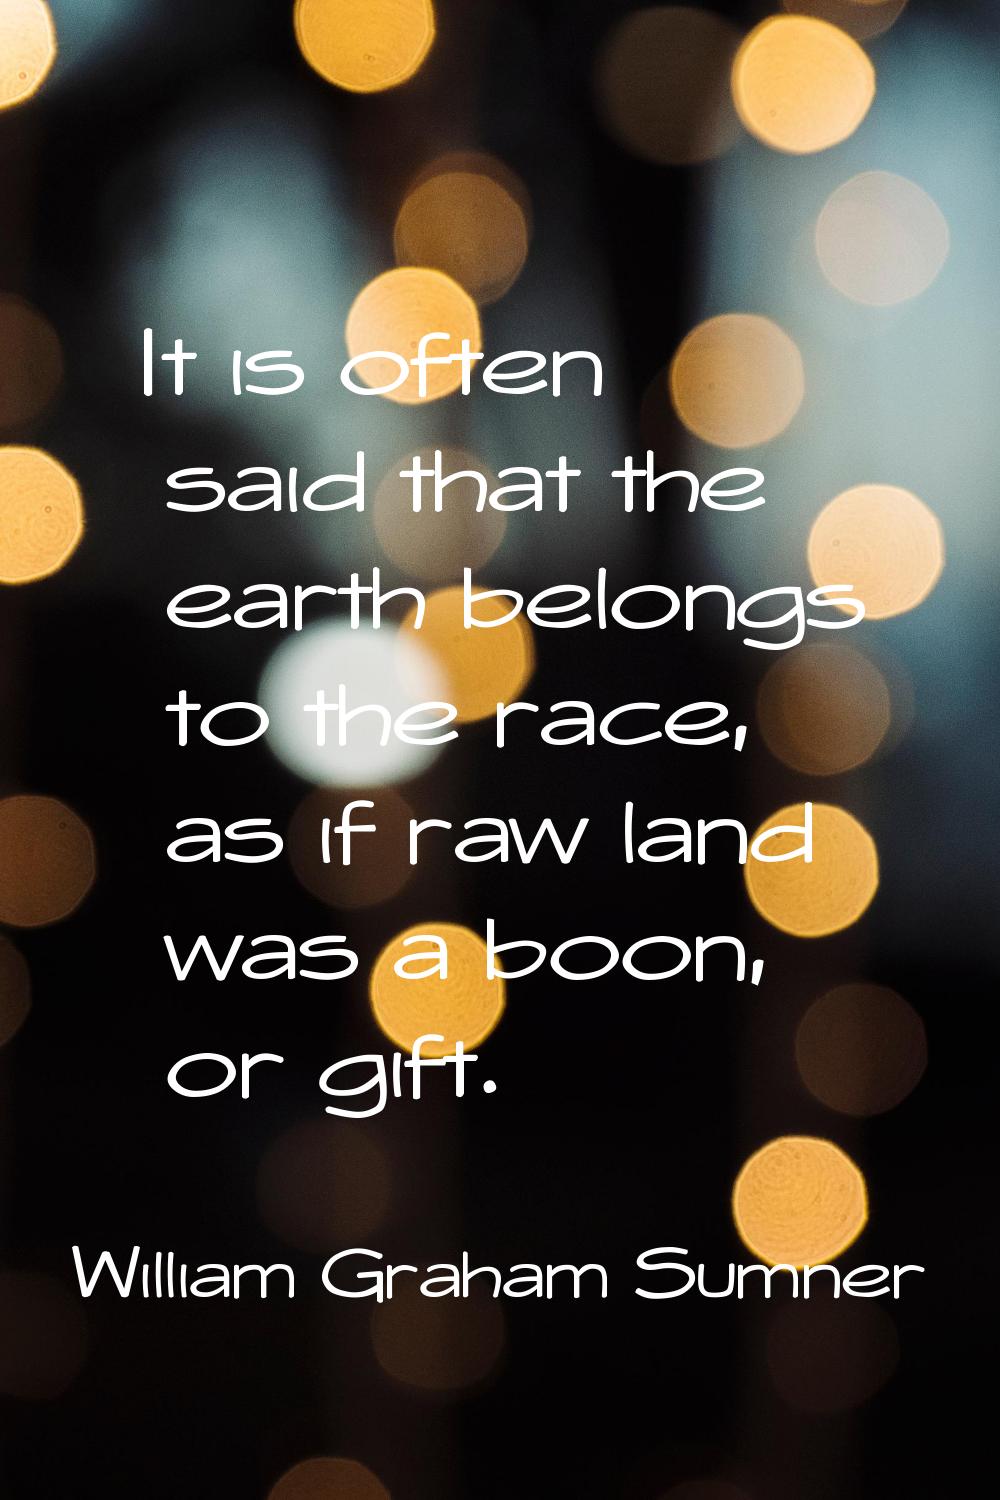 It is often said that the earth belongs to the race, as if raw land was a boon, or gift.